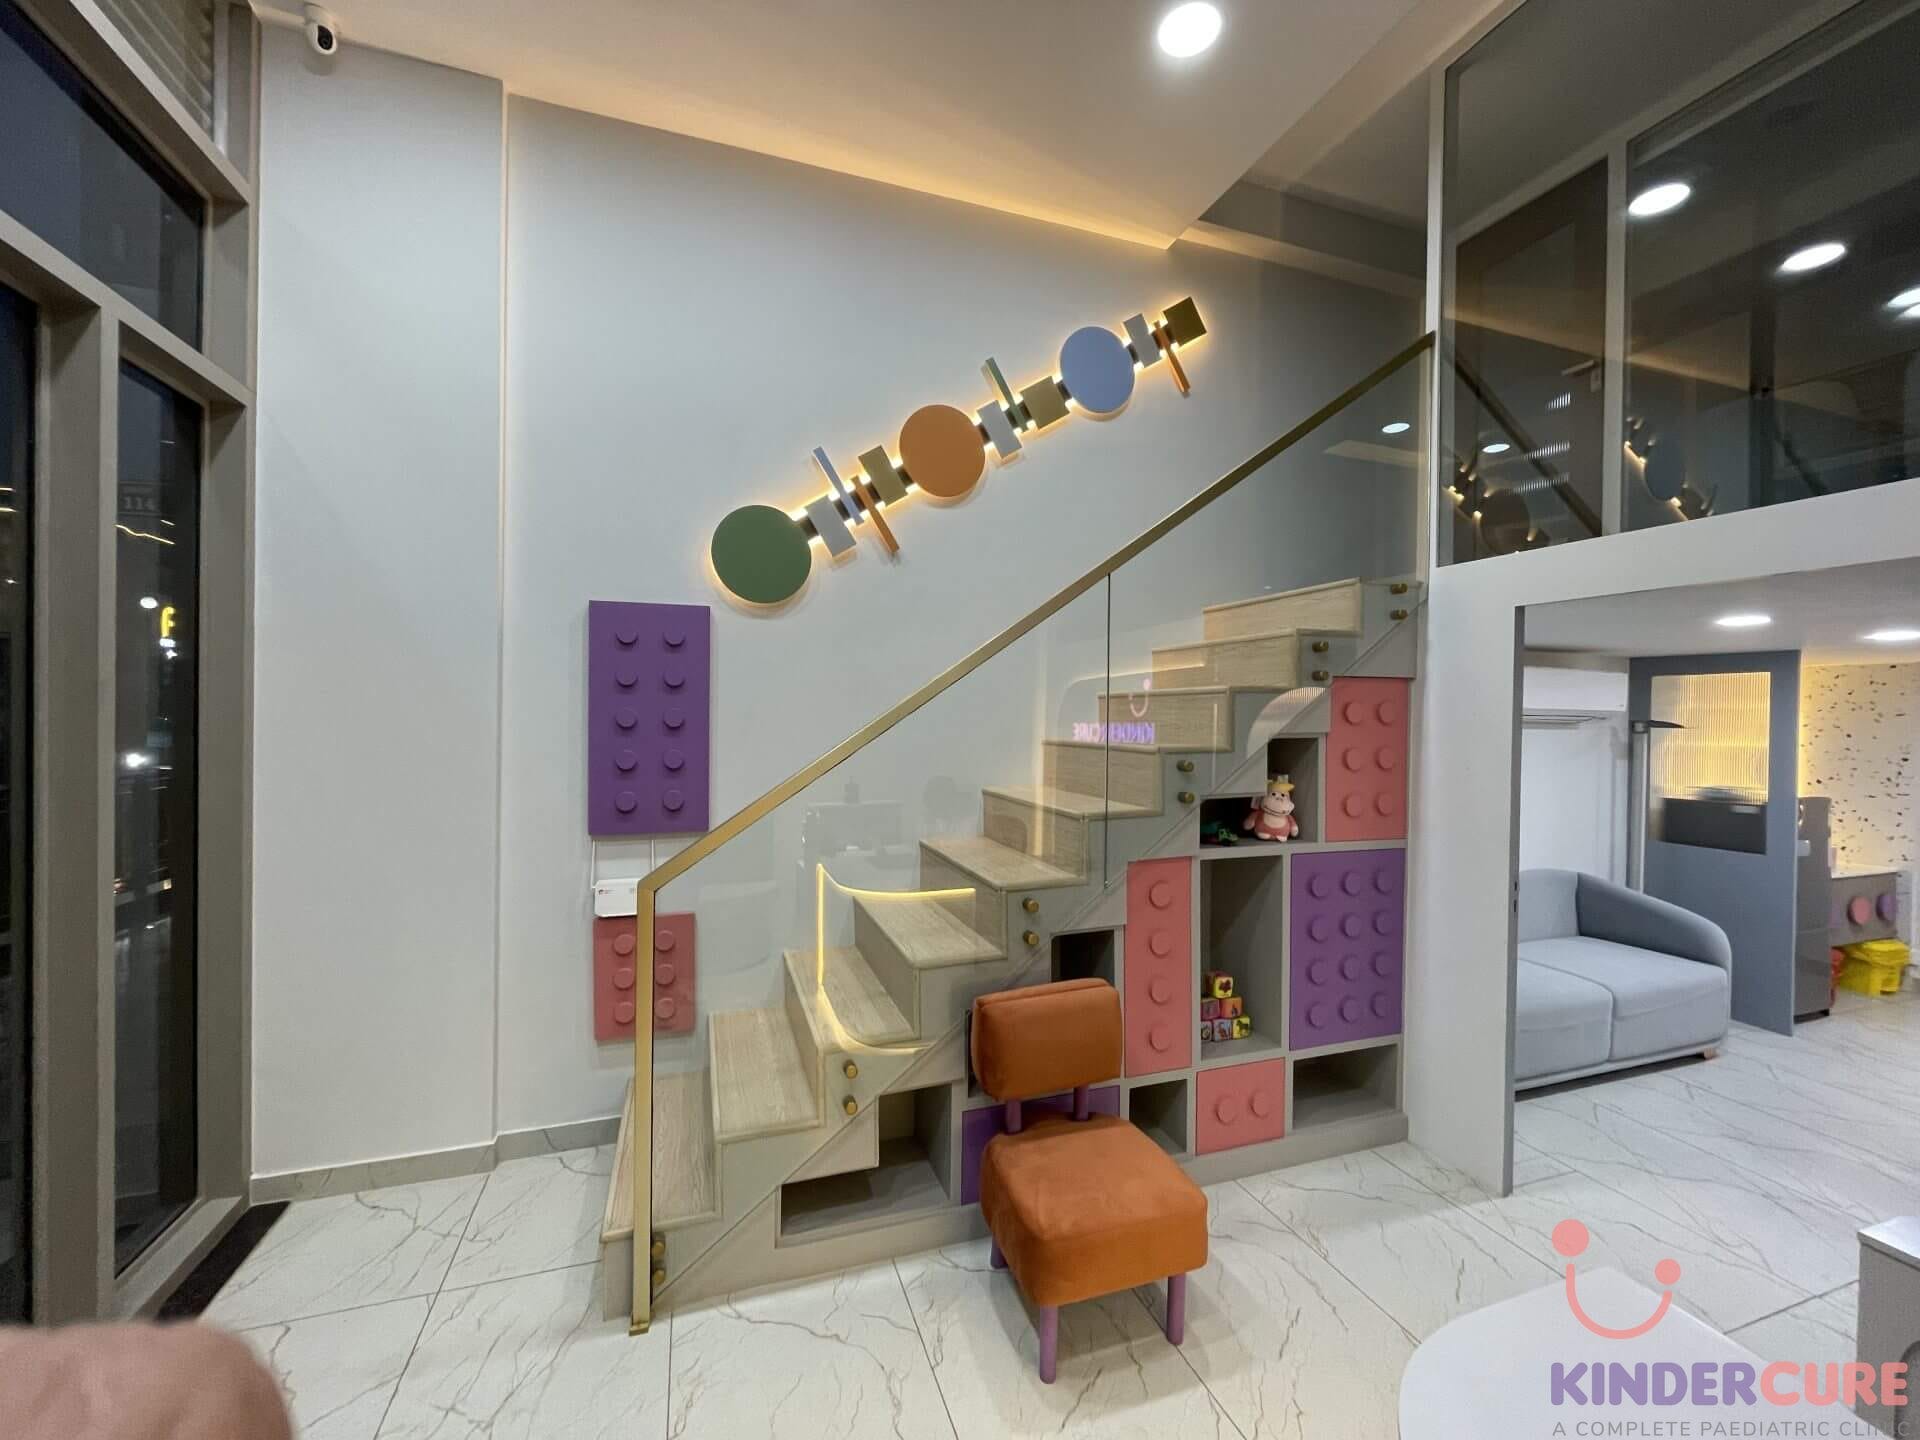 Interactive and colourful waiting area for children at KinderCure Clinic, showcasing kid-friendly designs